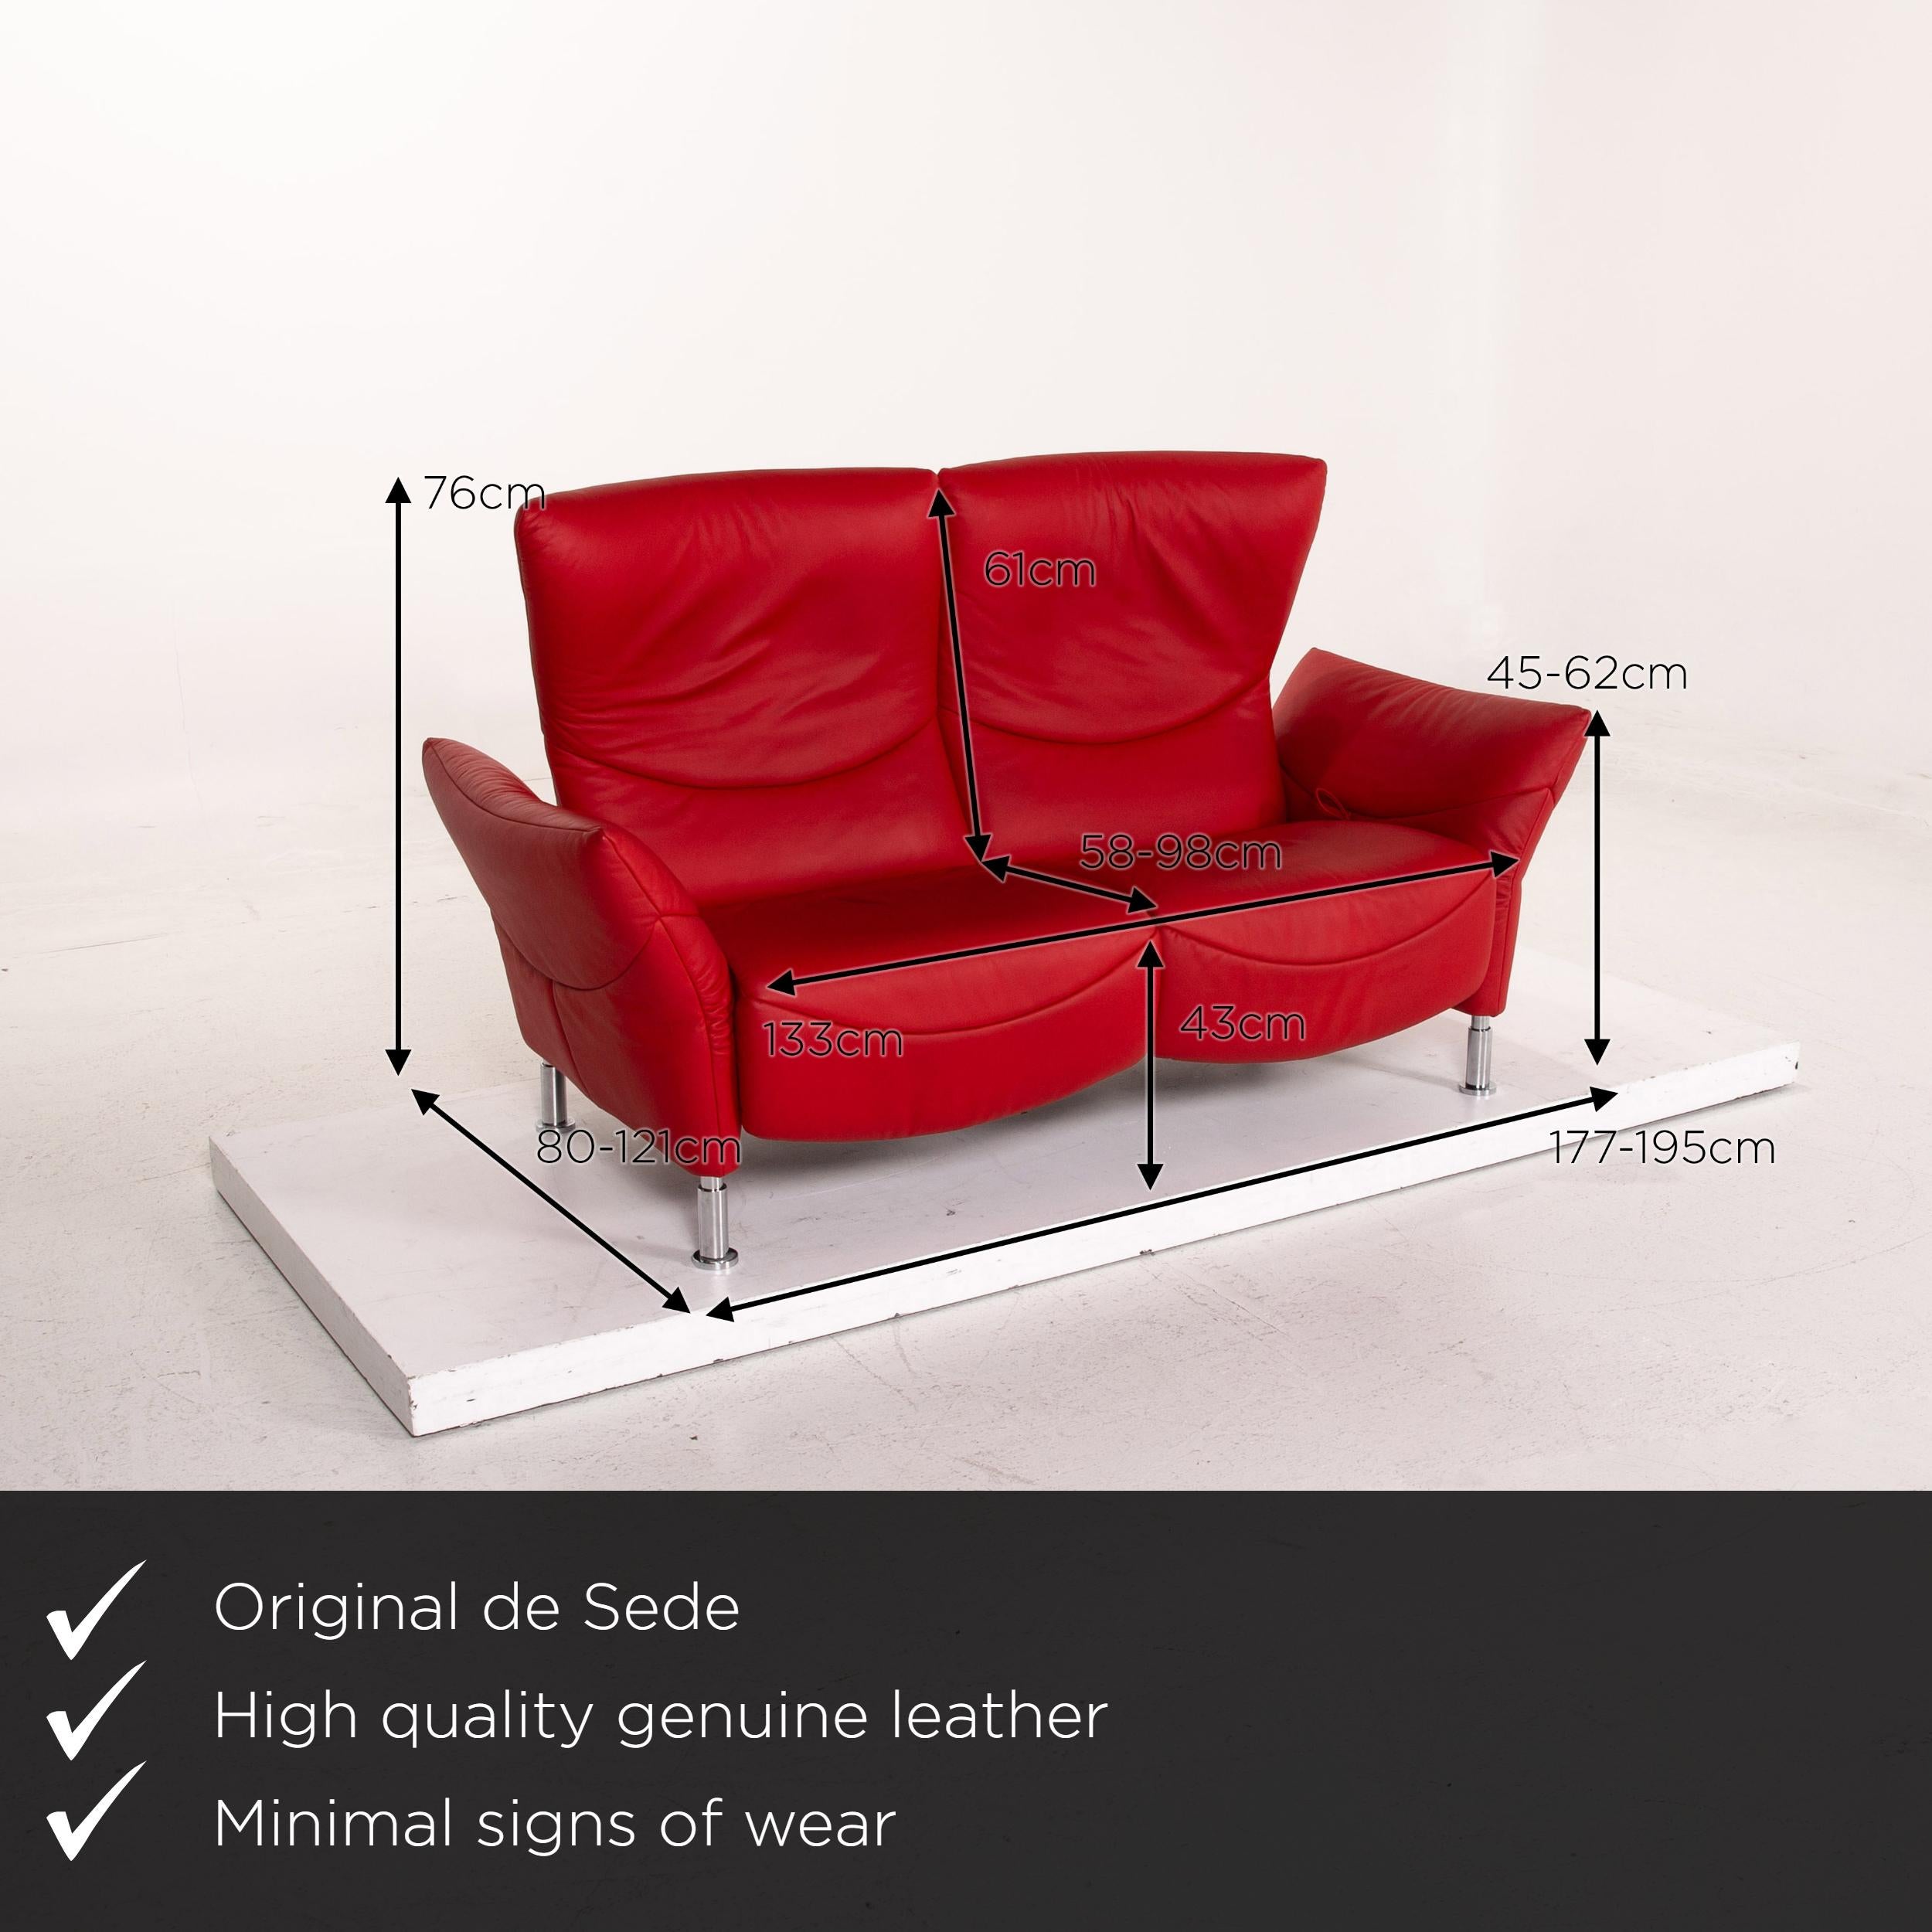 We present to you a De Sede DS 145 leather sofa red two-seat function couch.
 
 

 Product measurements in centimeters:
 

Depth 80
Width 195
Height 76
Seat height 43
Rest height 45
Seat depth 58
Seat width 133
Back height 61.
  